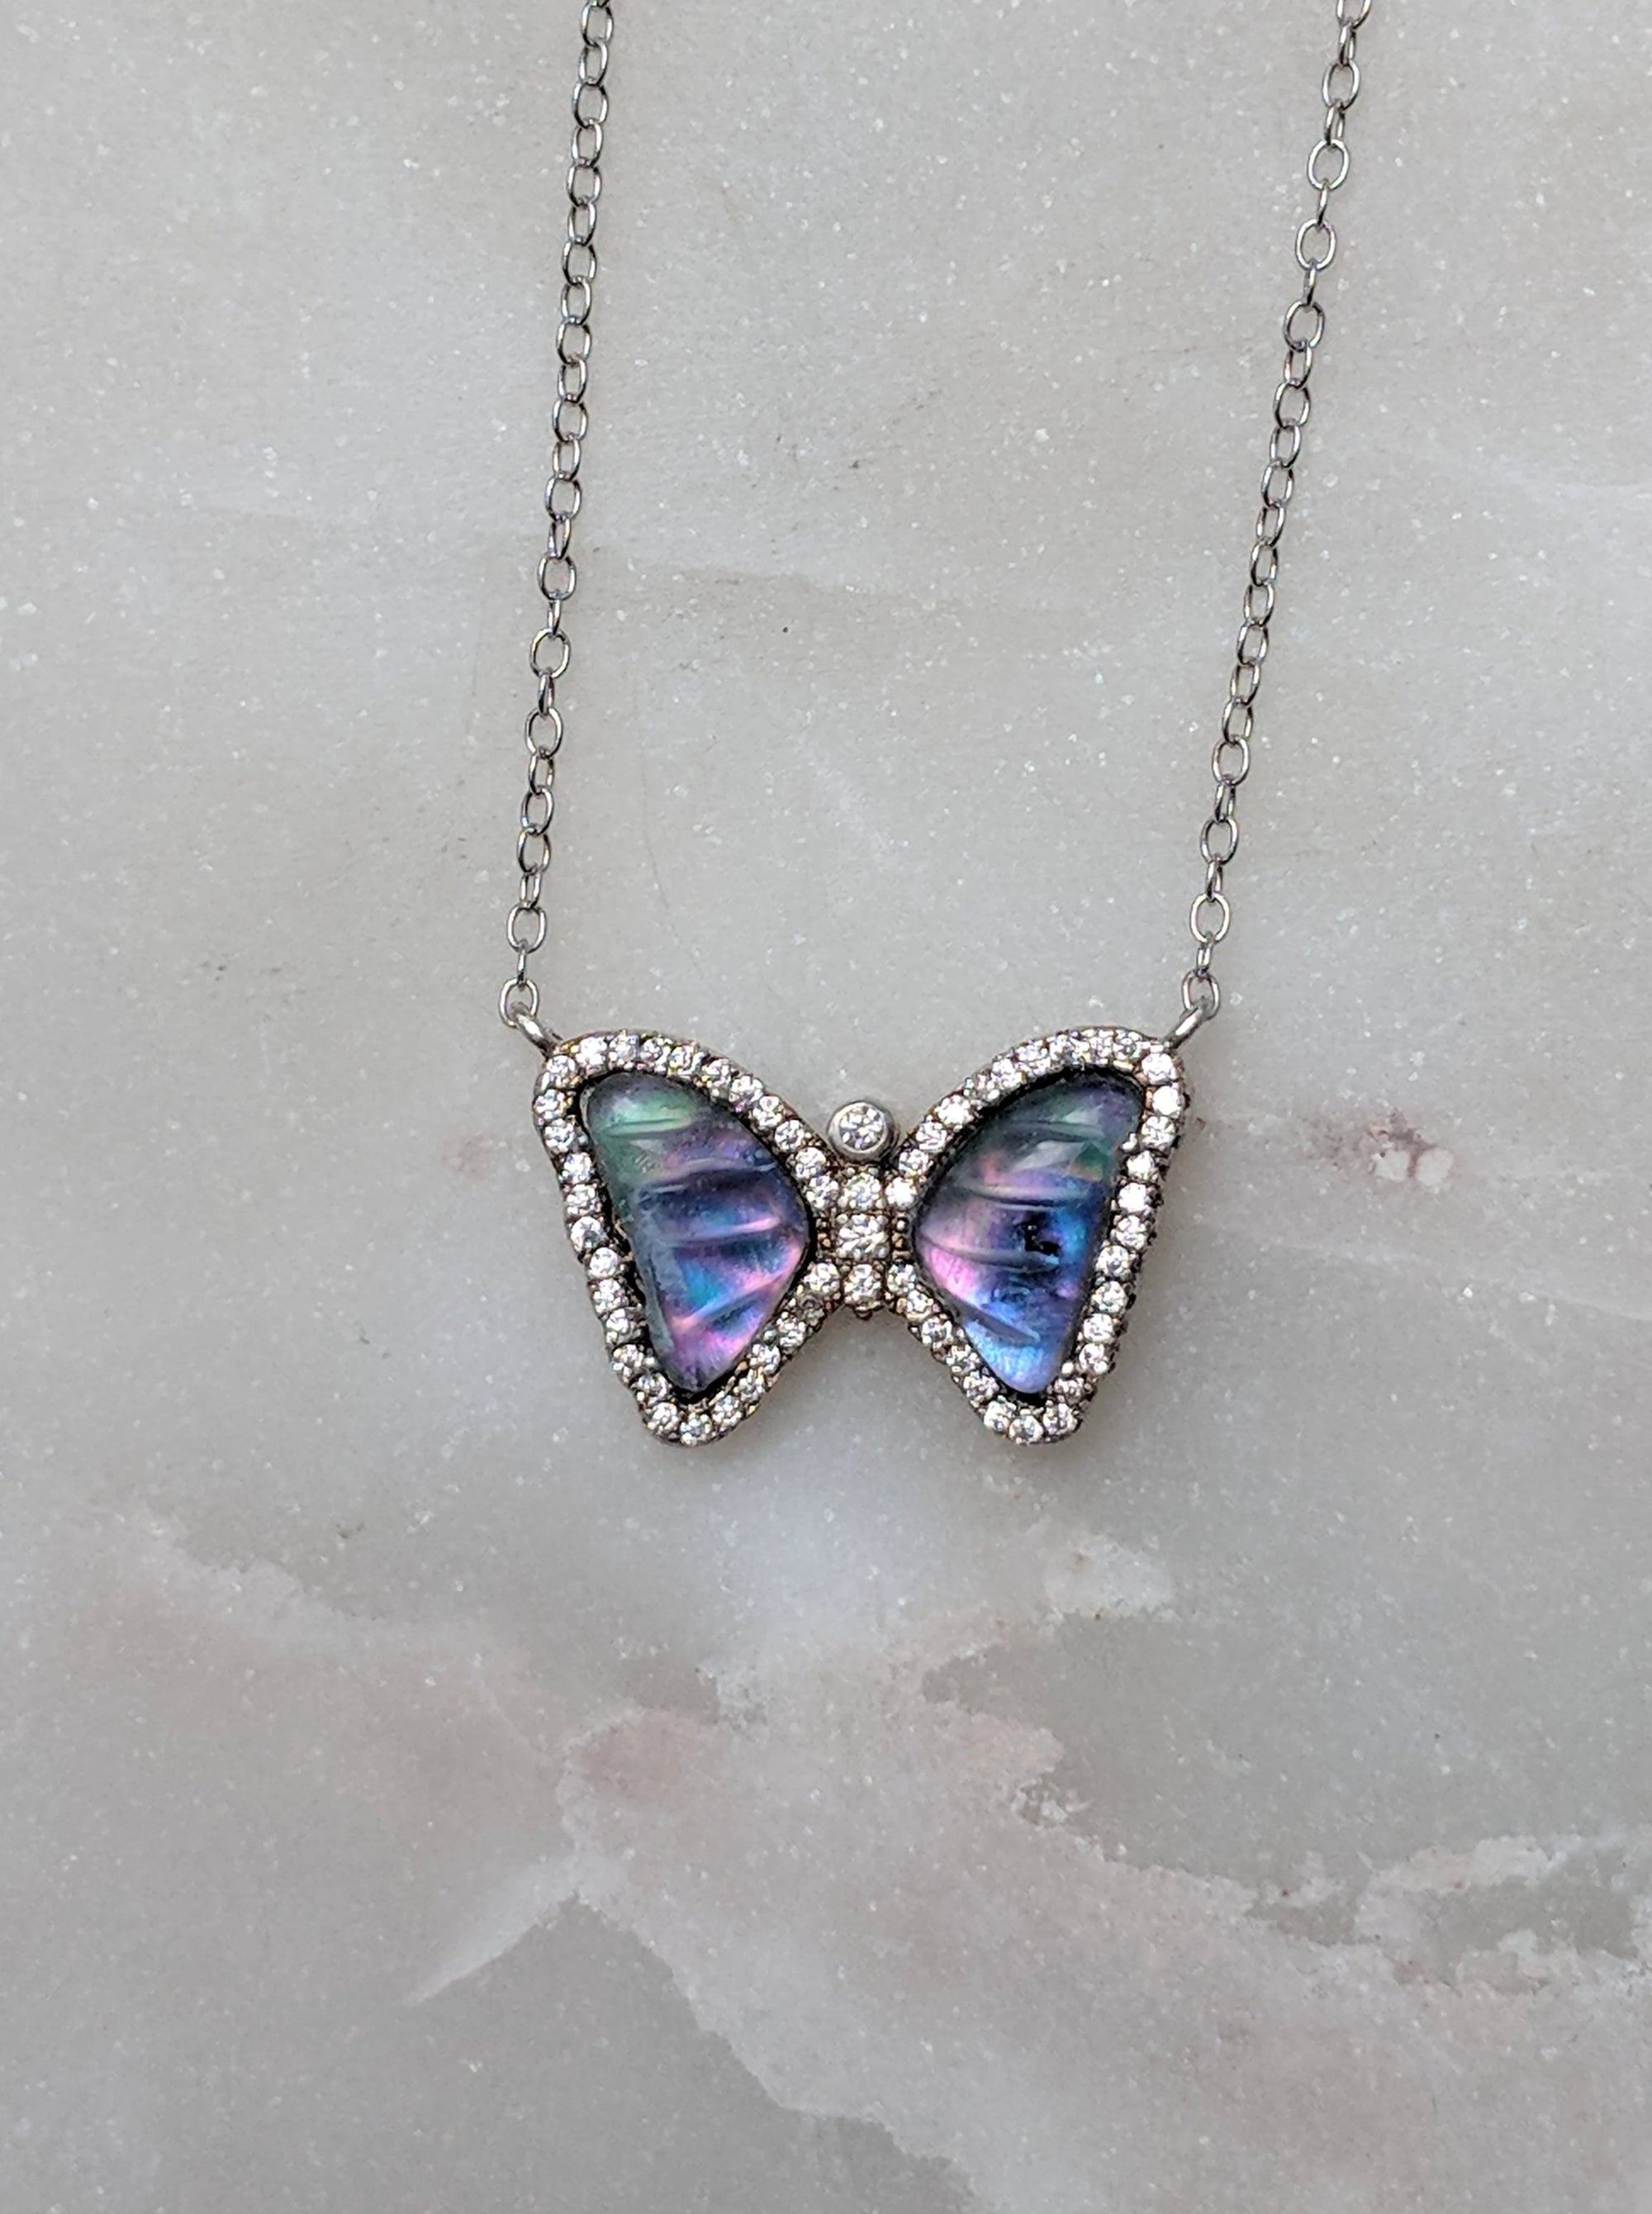 Limited Edition Mother of Pearl Butterfly